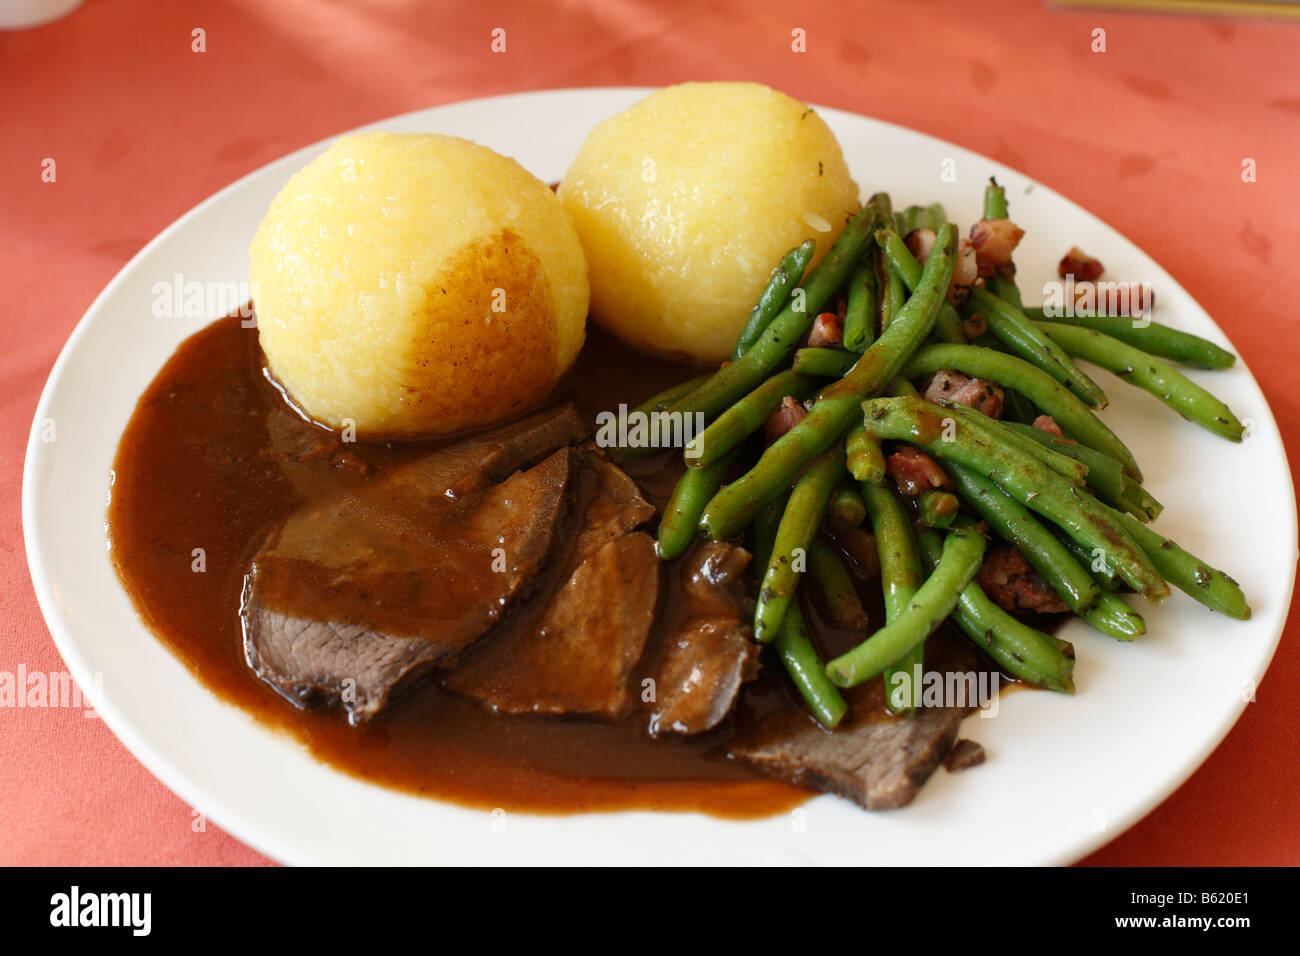 Thueringer Sauerbraten or Thuringian marinated beef served with green beans and dumplings, Rhoen, Thuringia, Germany, Europe Stock Photo